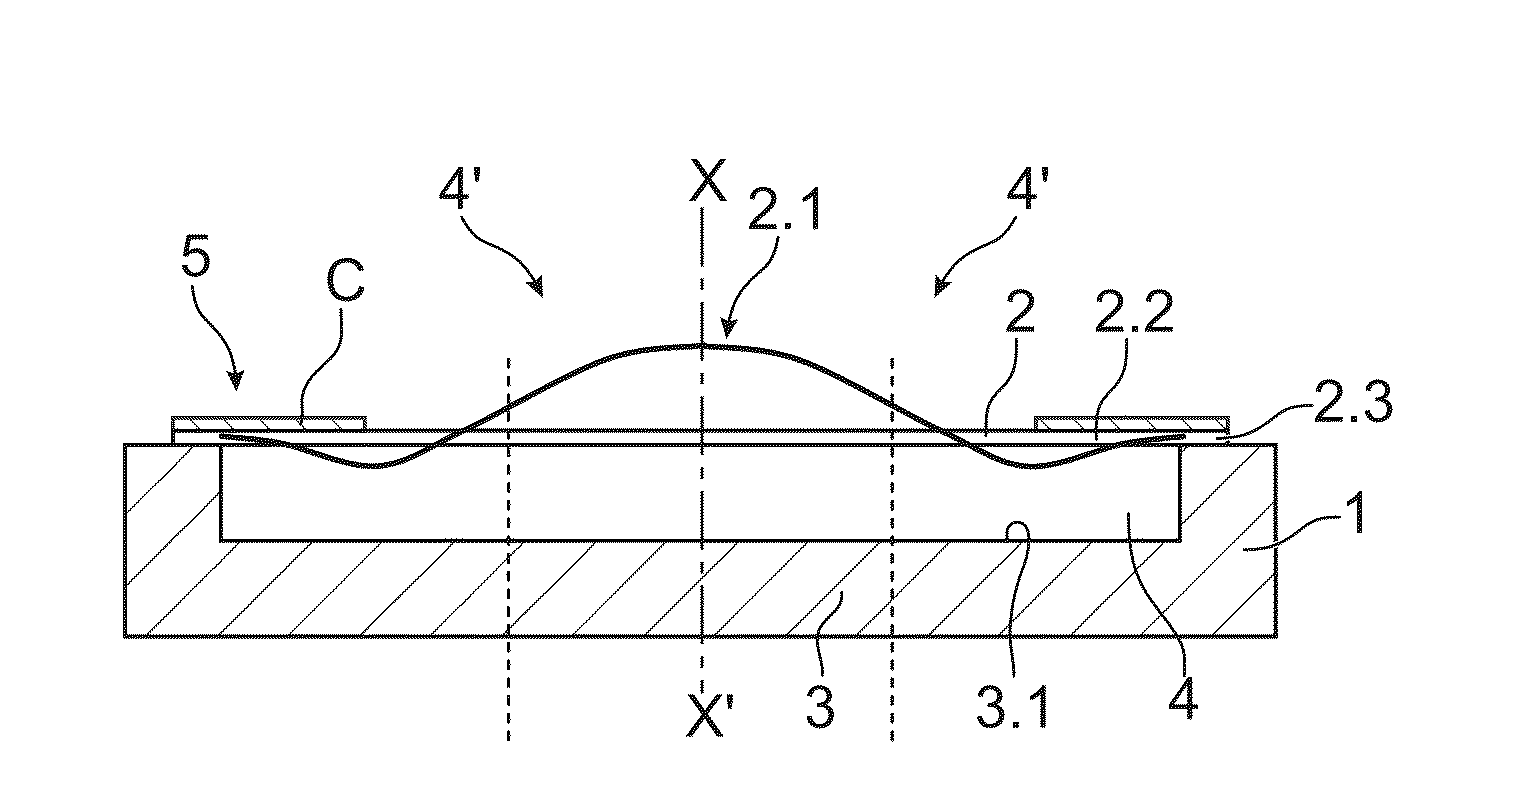 Optical device with a piezoelectrically actuated deformable membrane shaped as a continuous crown